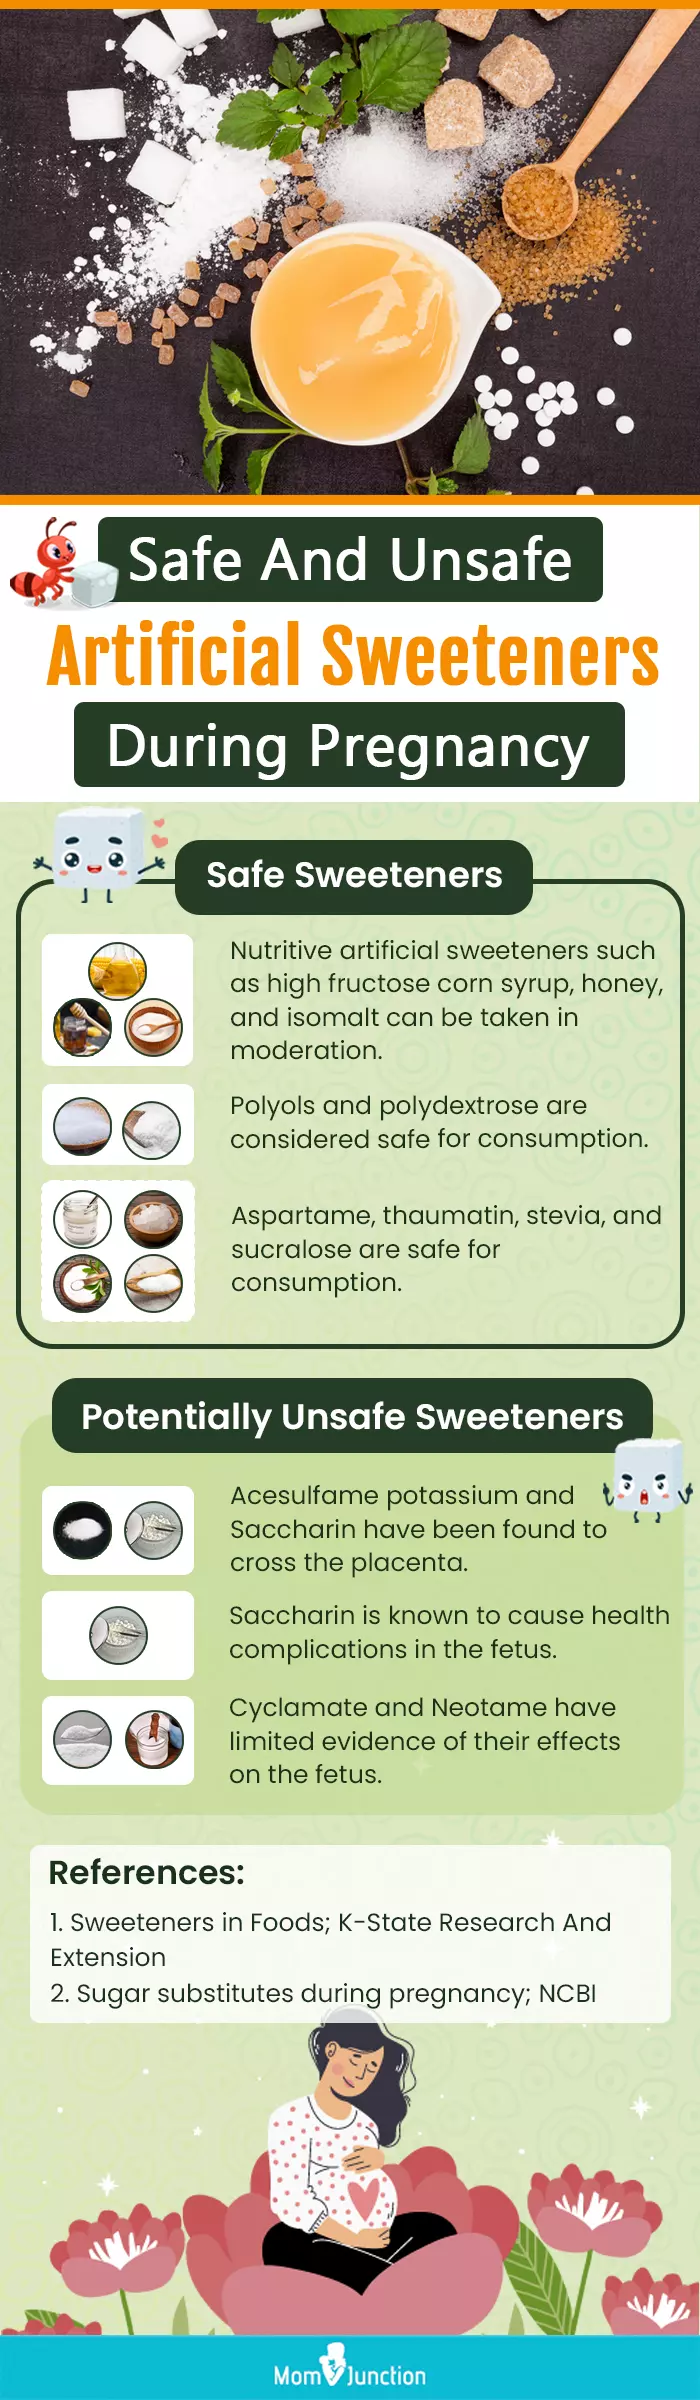 safe and unsafe artificial sweeteners during pregnancy (infographic)